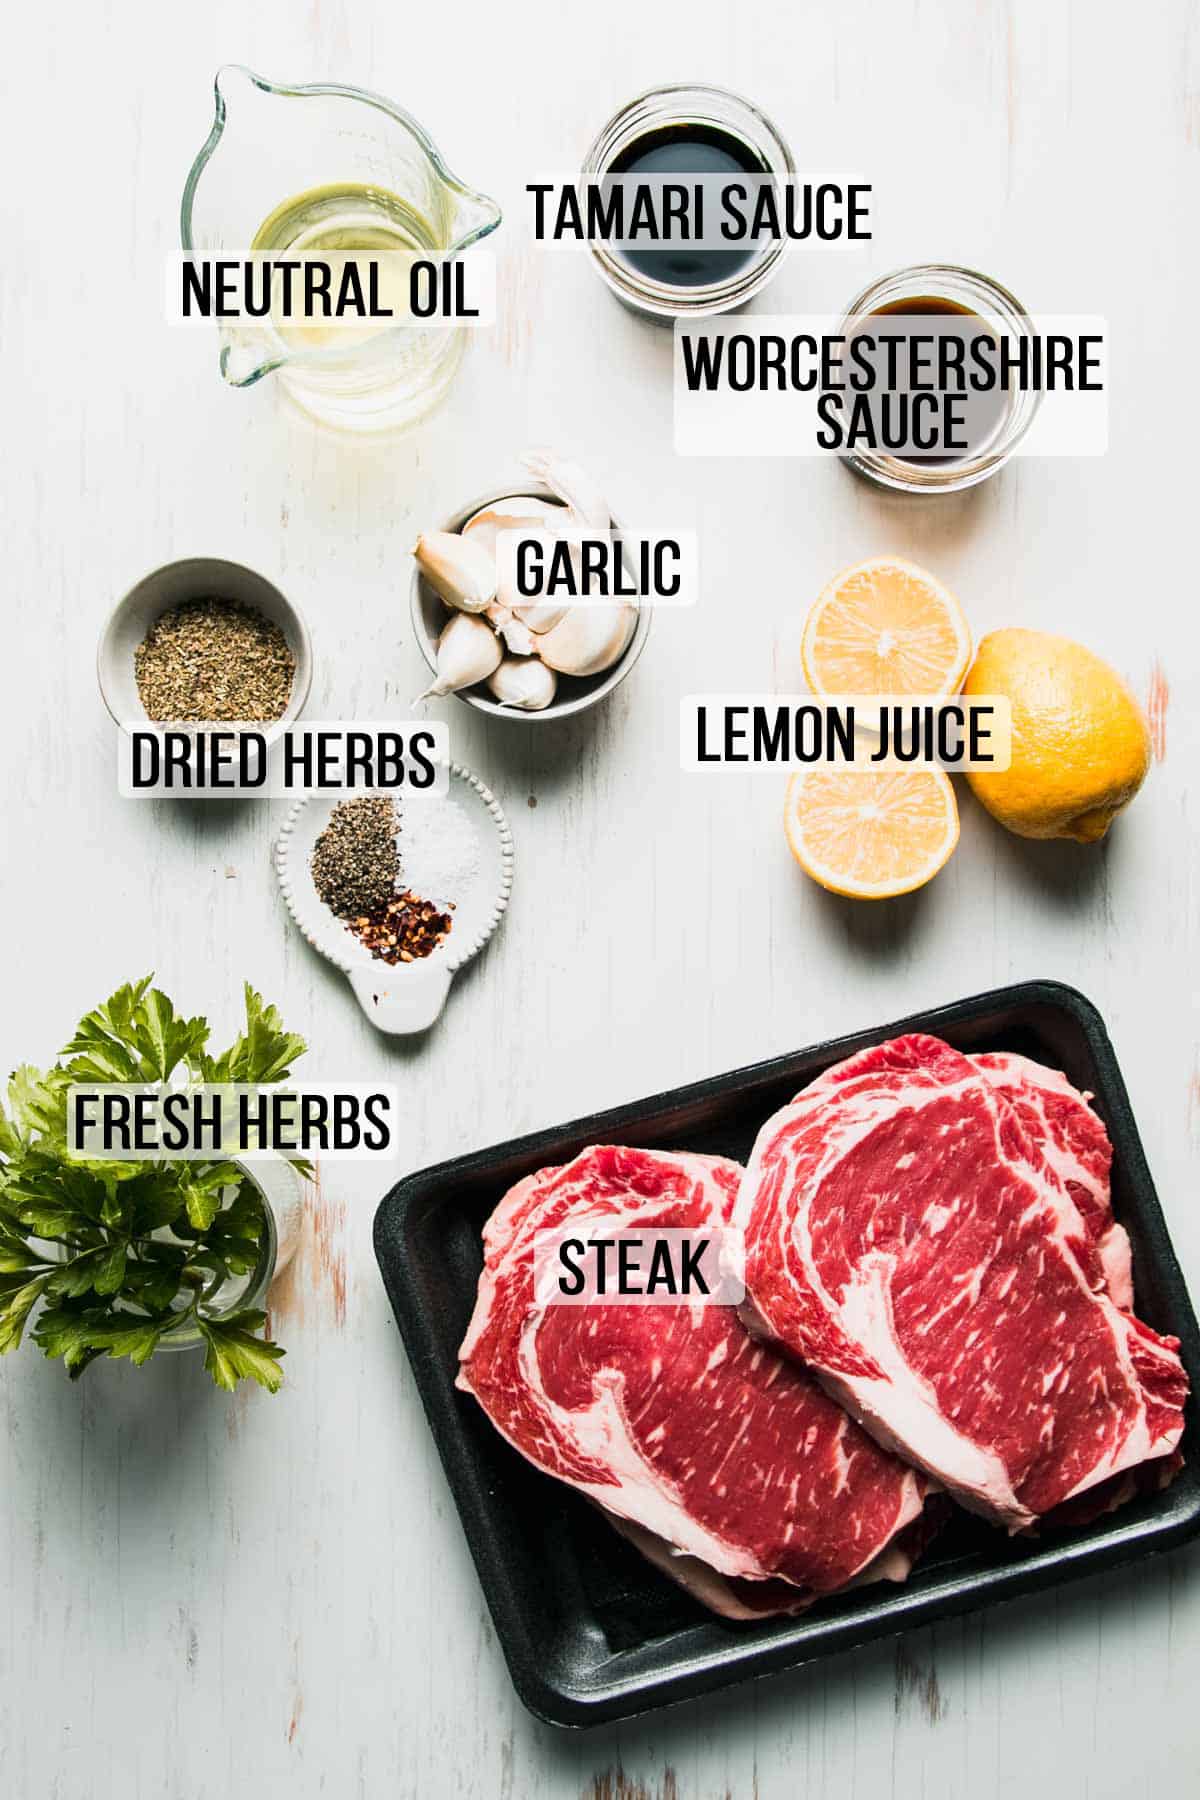 Ingredients for marinade and steak laid out on white wooden surface labeled with text, "neutral oil, Tamari sauce, Worcestershire sauce, garlic, dried herbs, lemon juice, fresh herbs, steak."